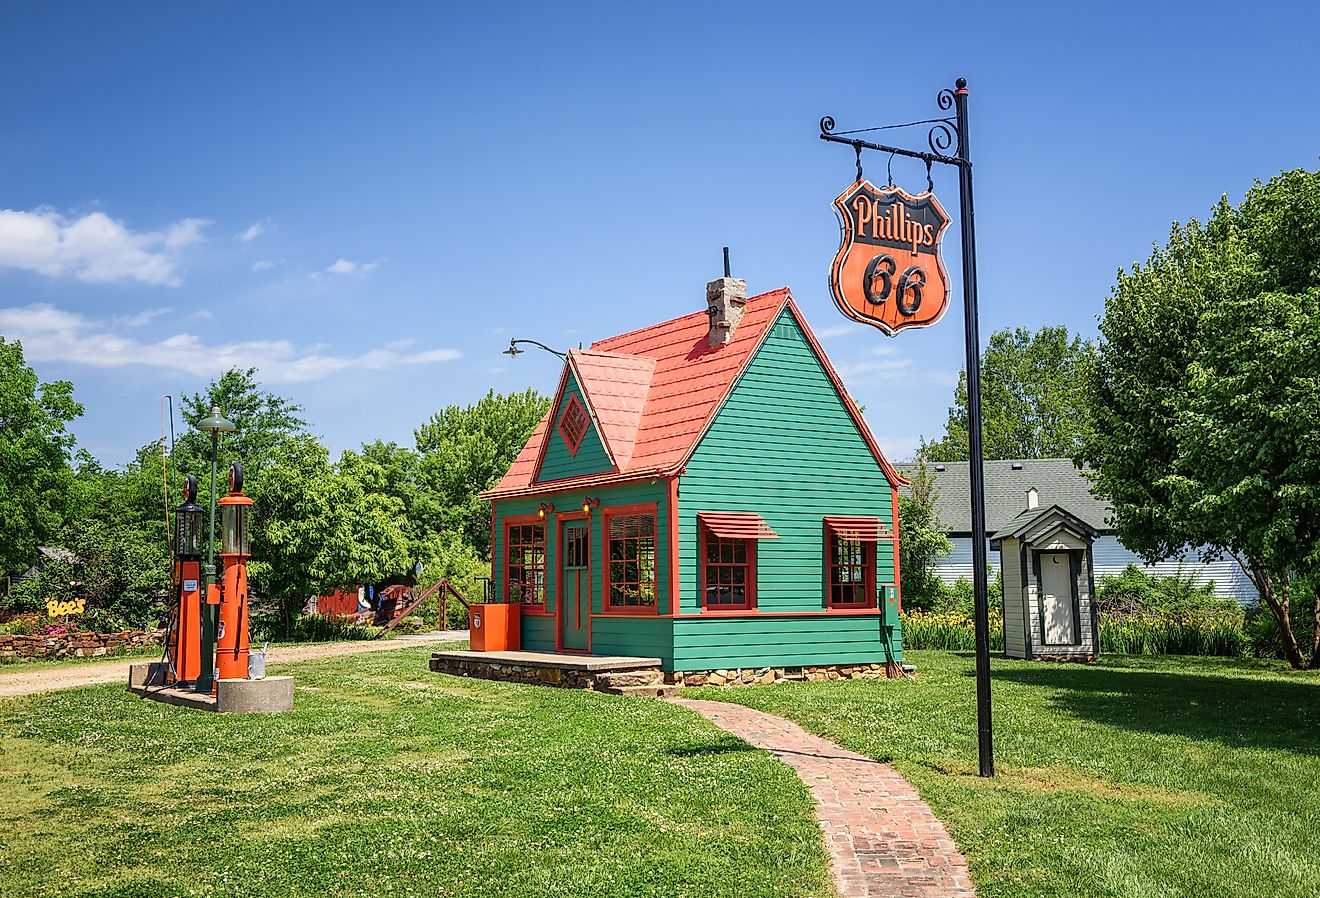 Restored vintage Phillips 66 Gas Station located at Red Oak II, near historic Route 66, Carthage, Missouri.